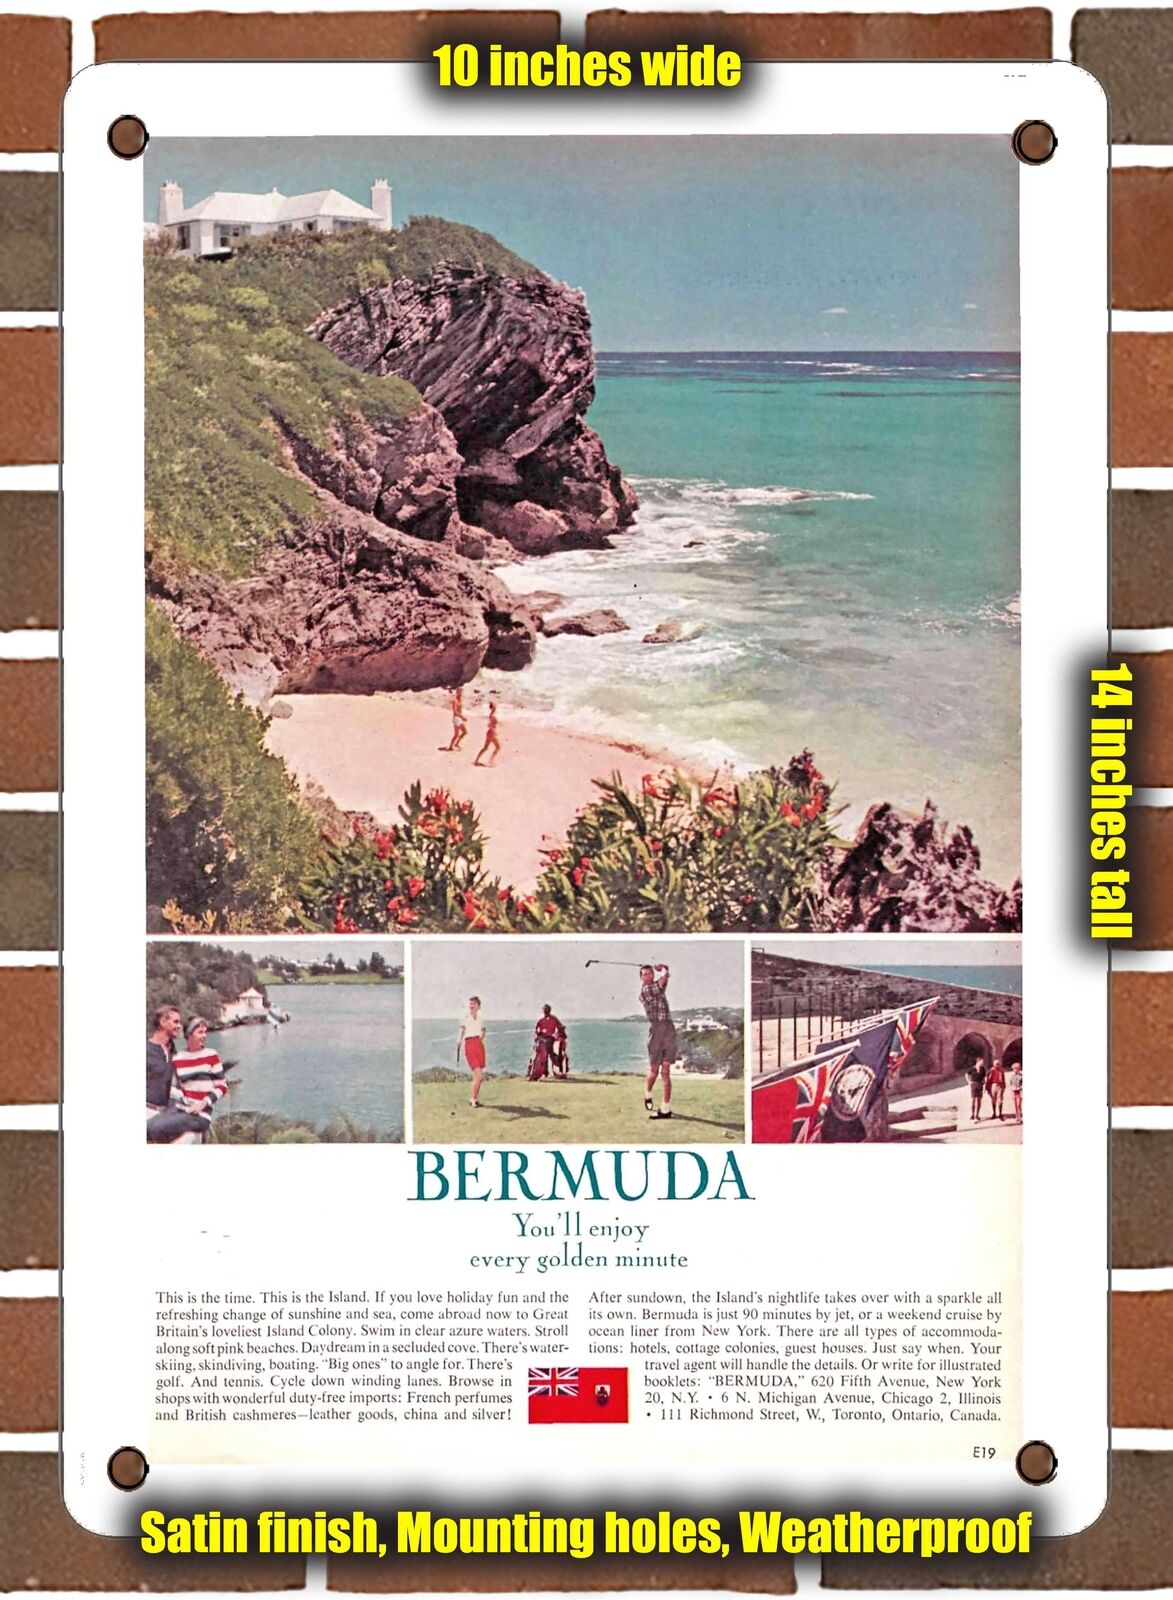 METAL SIGN - 1964 Bermuda You'll Enjoy Every Golden Minute - 10x14 Inches